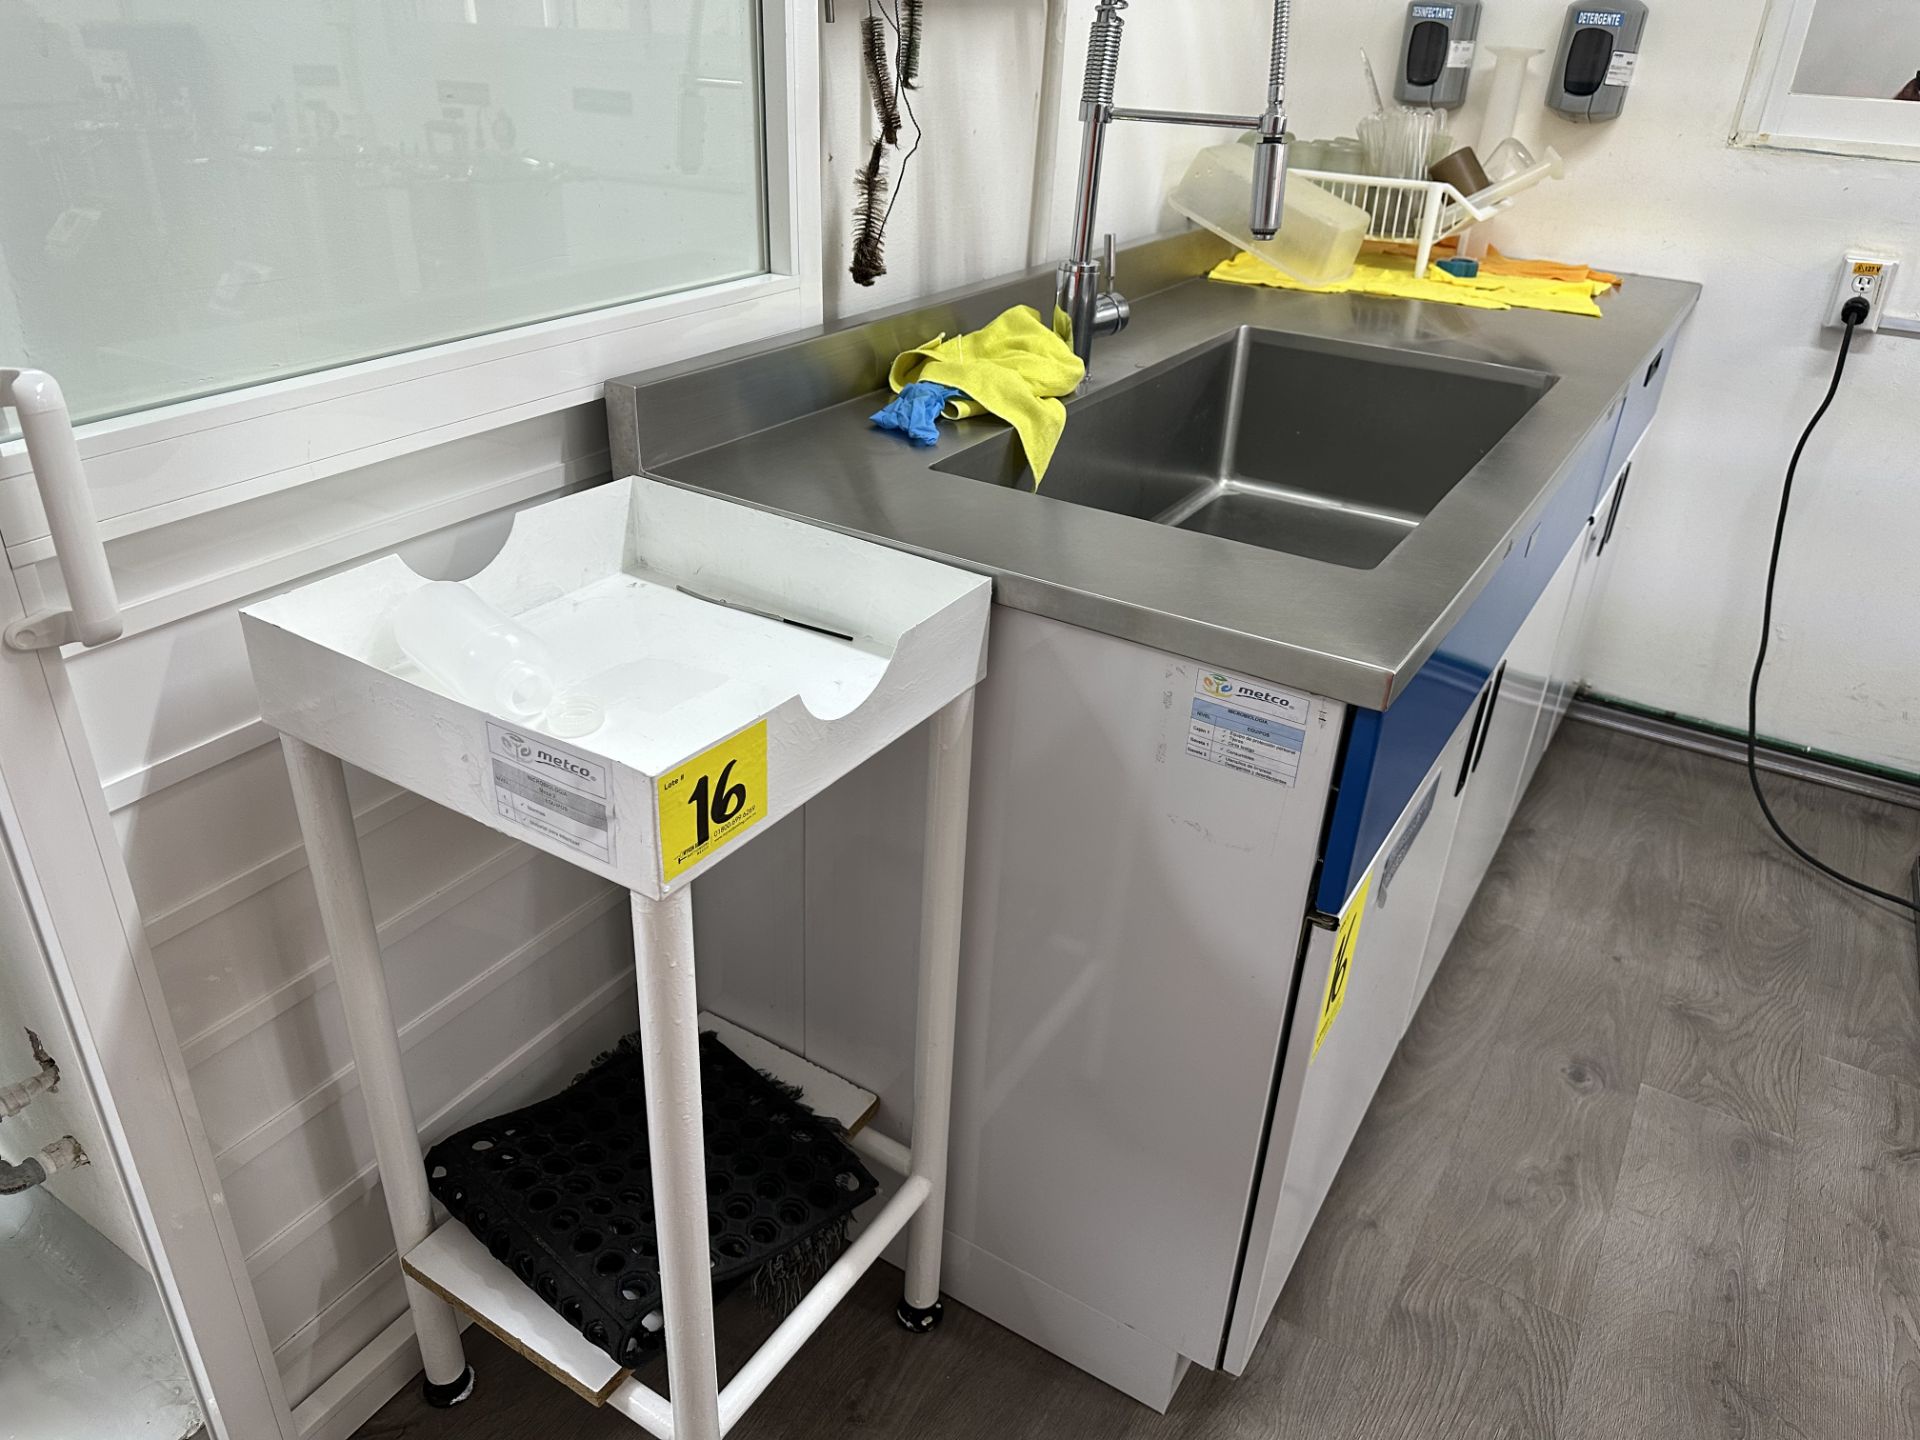 1 laboratory cabinet with stainless steel cover and sink, measures approximately 2.0 x 0.76 x 0.90 - Image 7 of 13